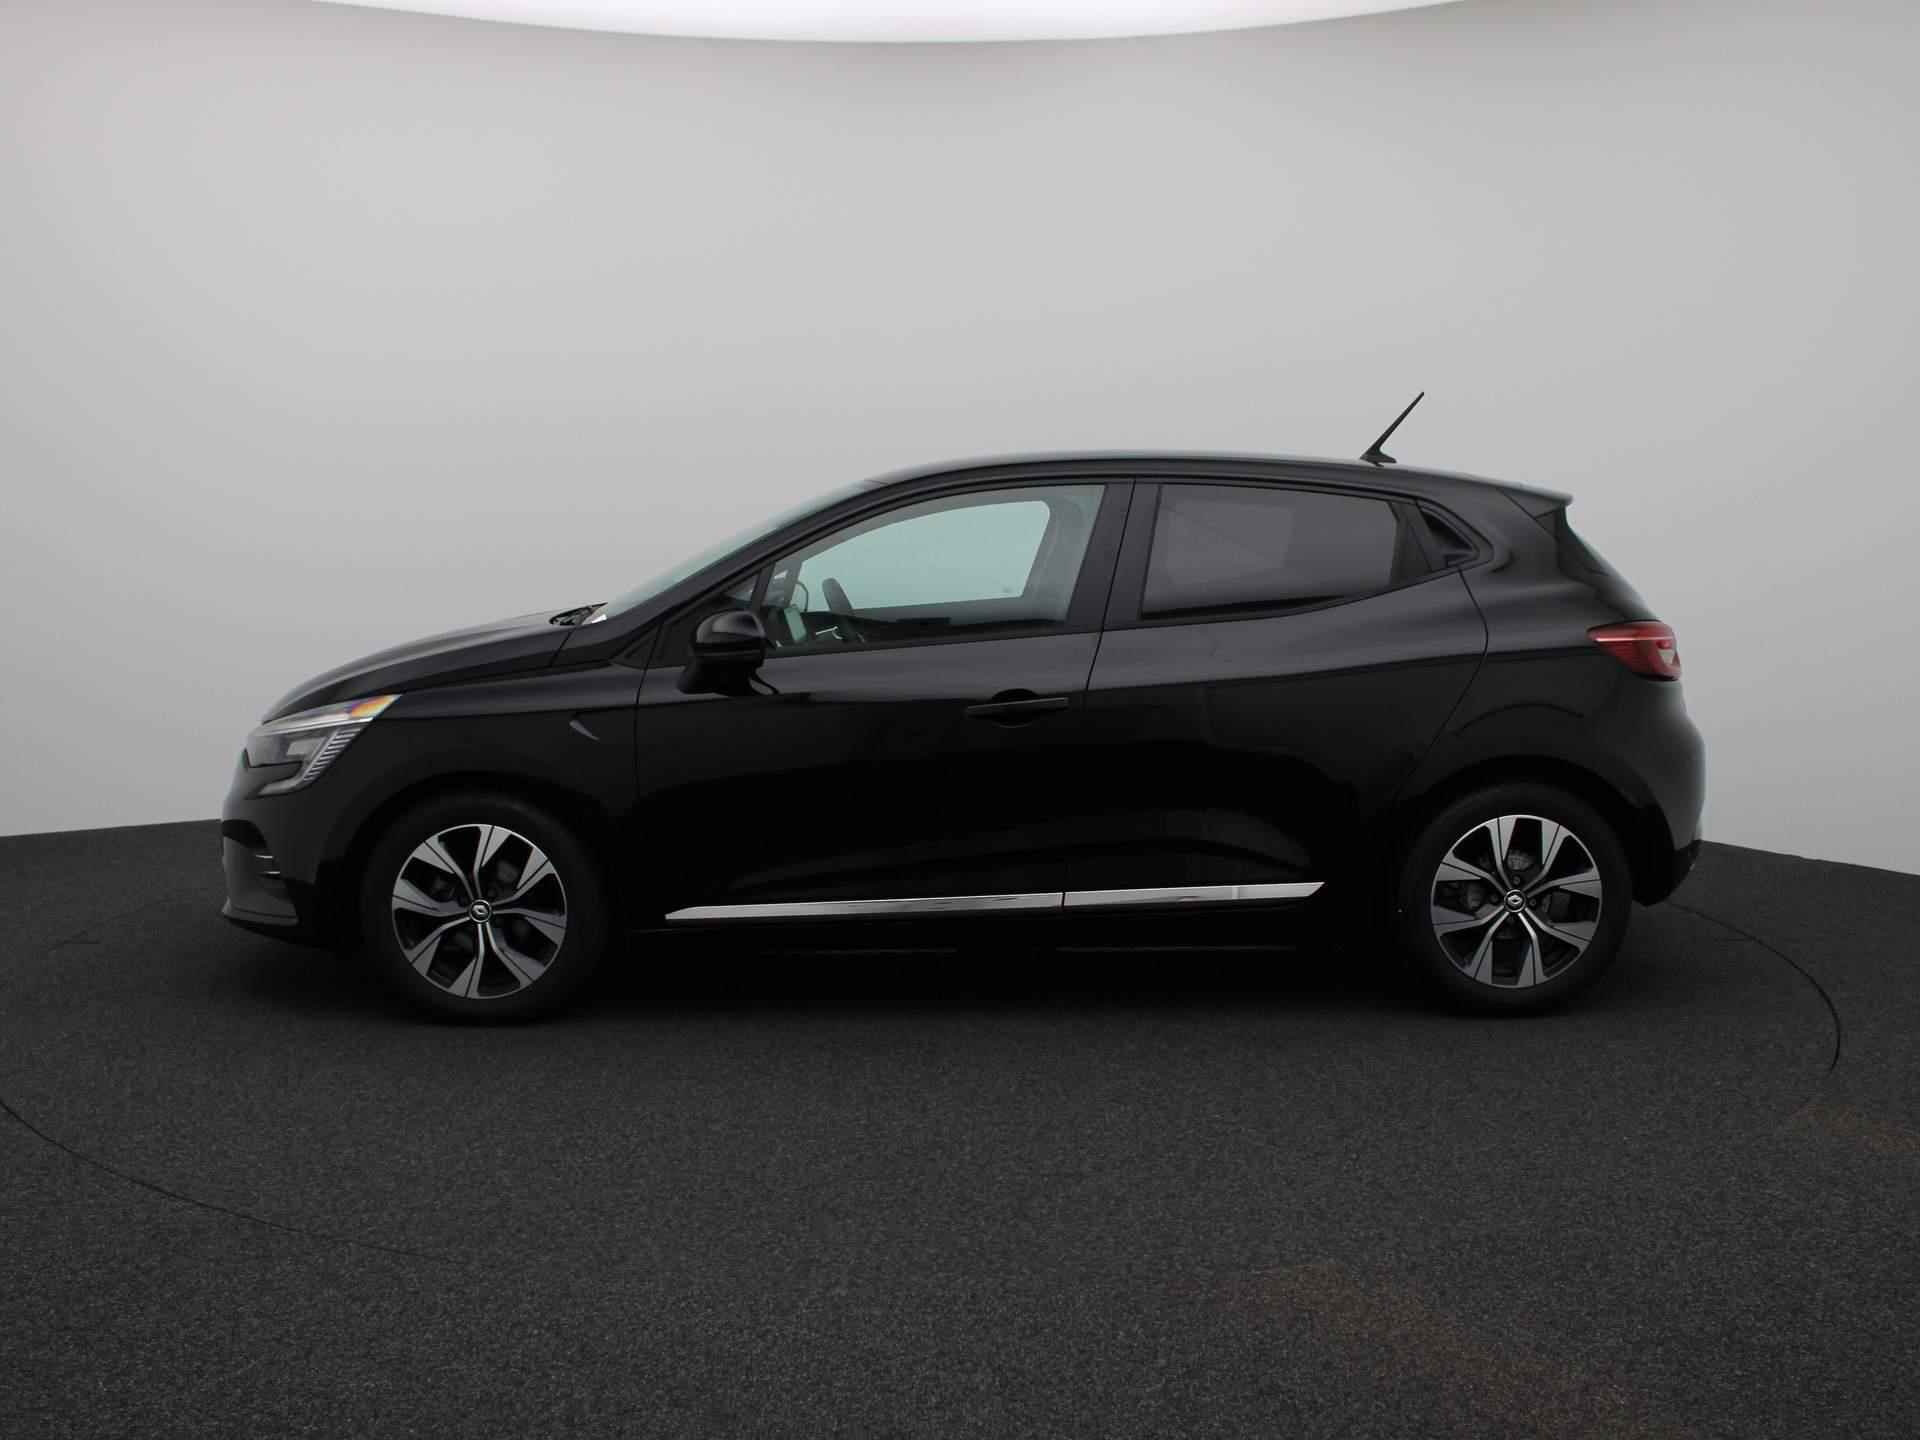 Renault Clio 1.0 TCe 90 Evolution | Climate Control | Full-Map Navigatie | Privacy Glass | PDC Achter | Keyless | 16" LMV | Apple Carplay & Android Auto - 4/35